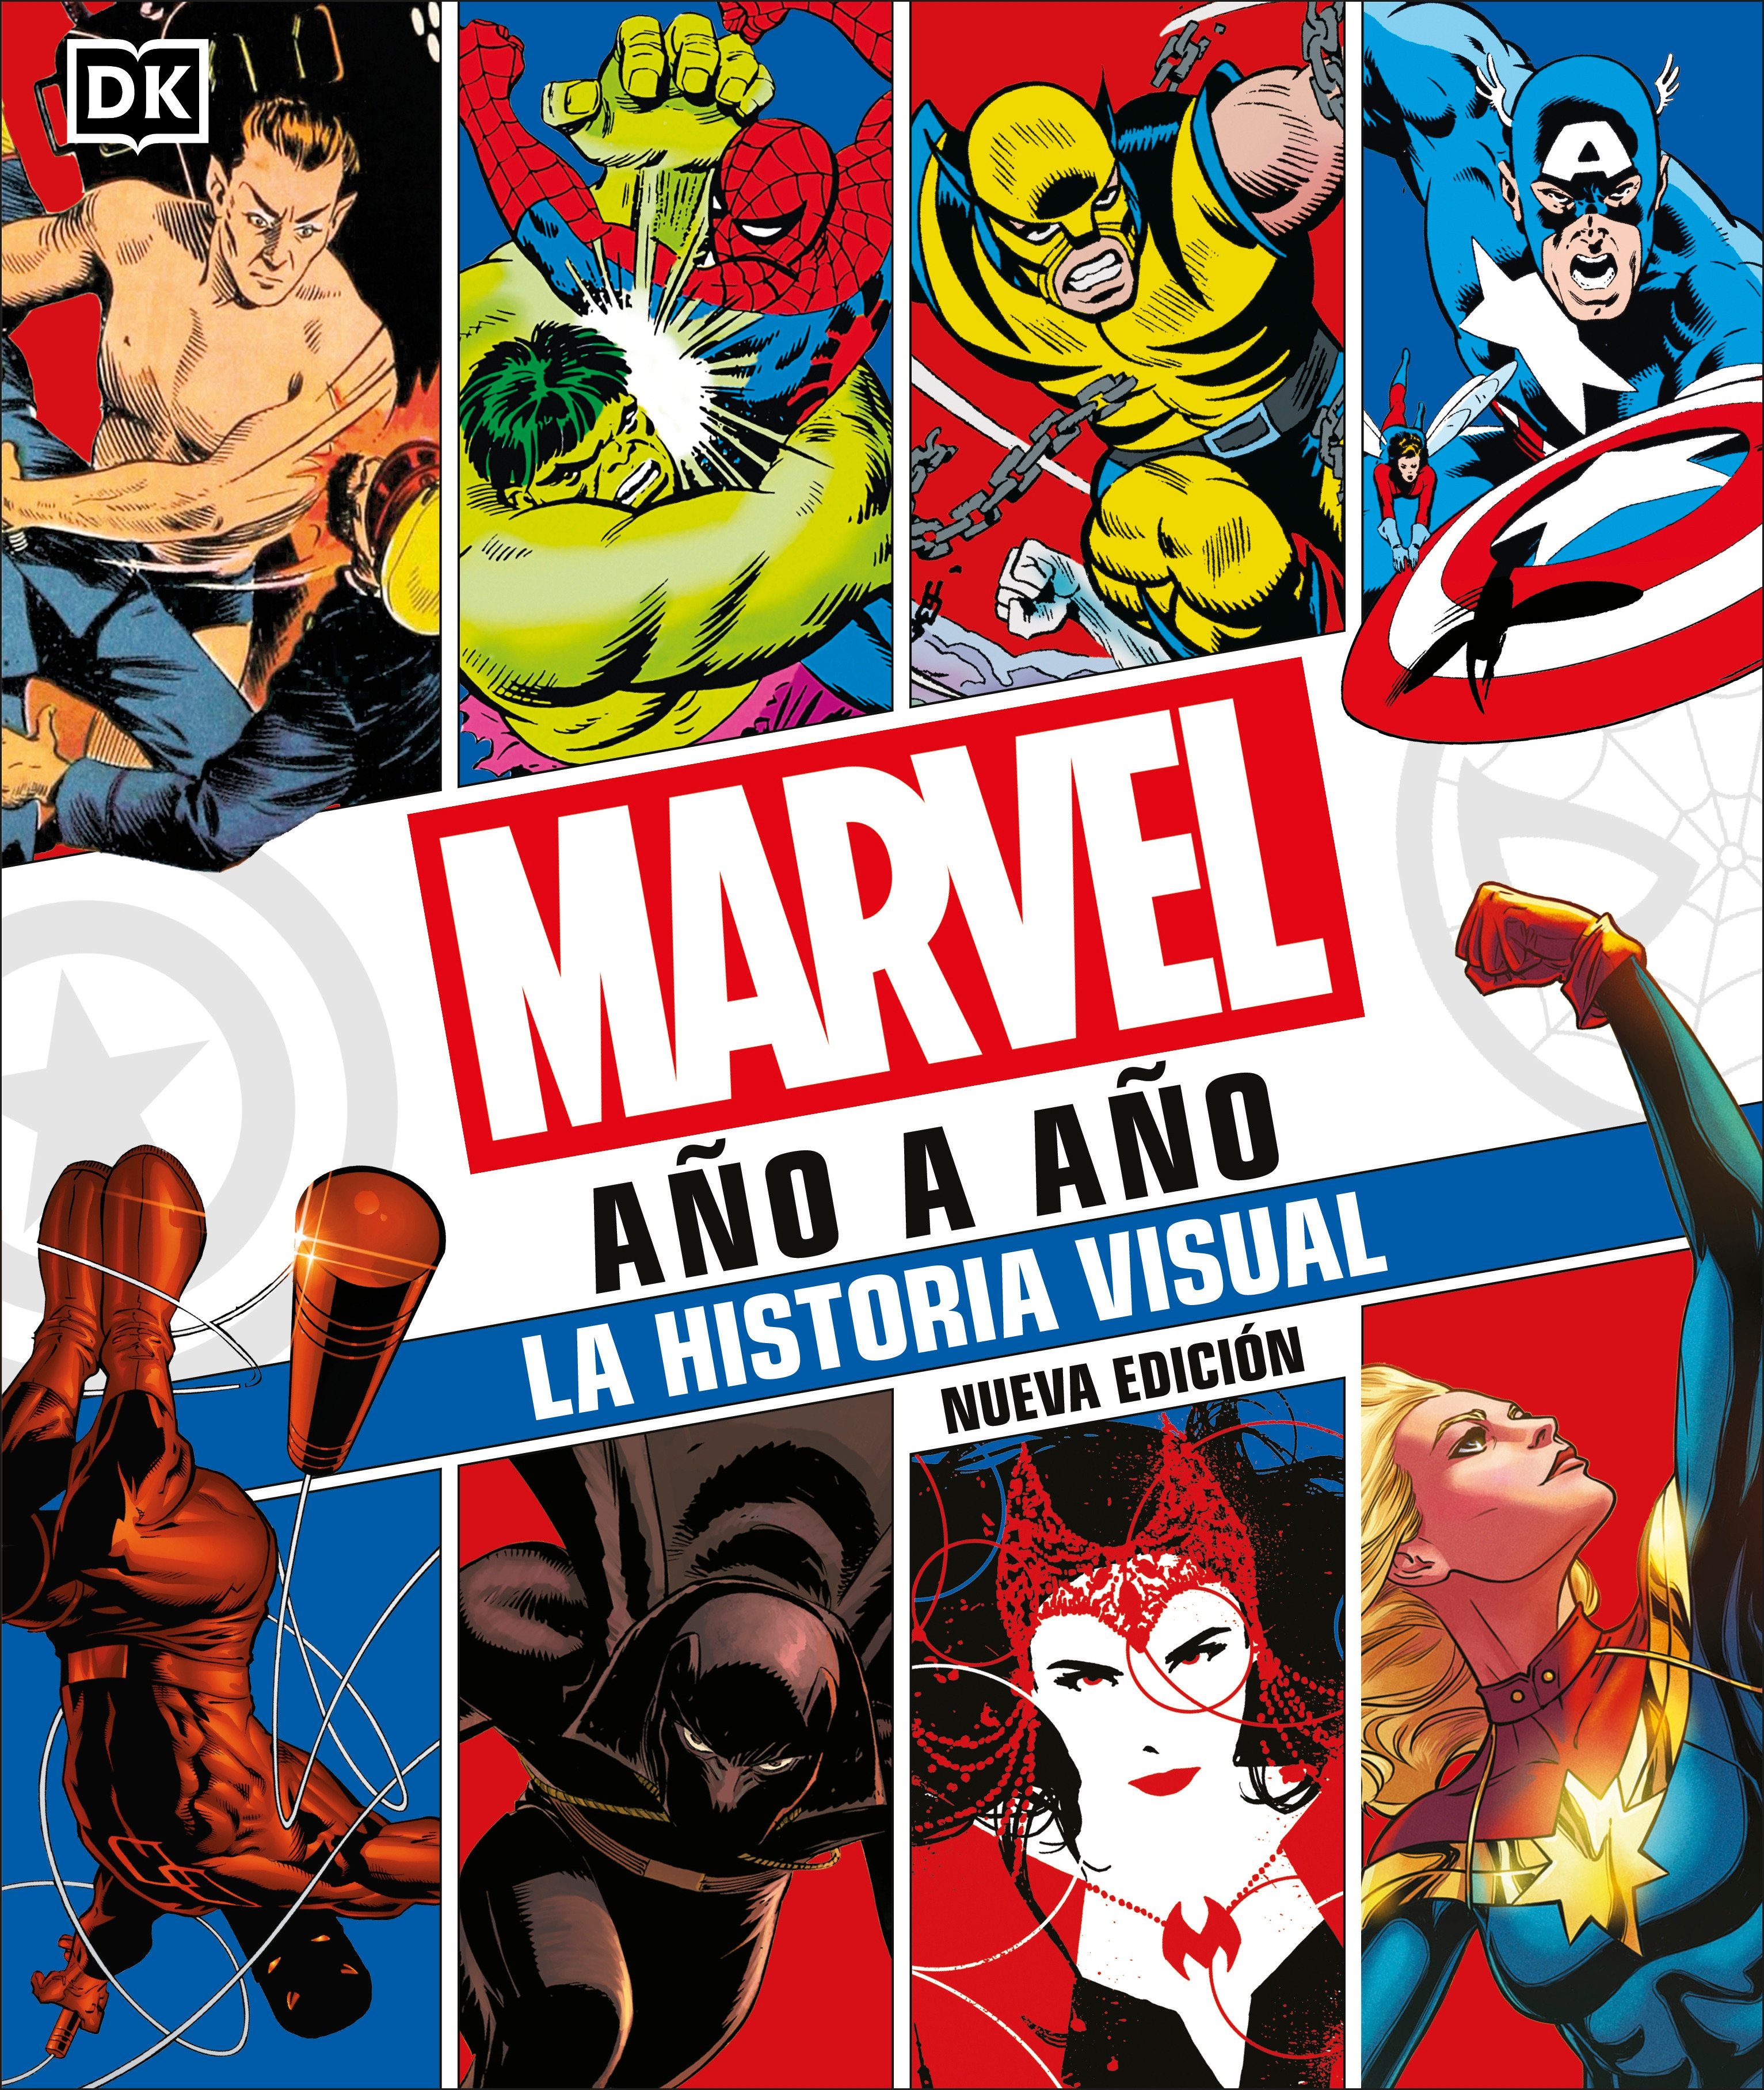 Marvel Año A Año (Marvel Year By Year) (Hardcover Book)